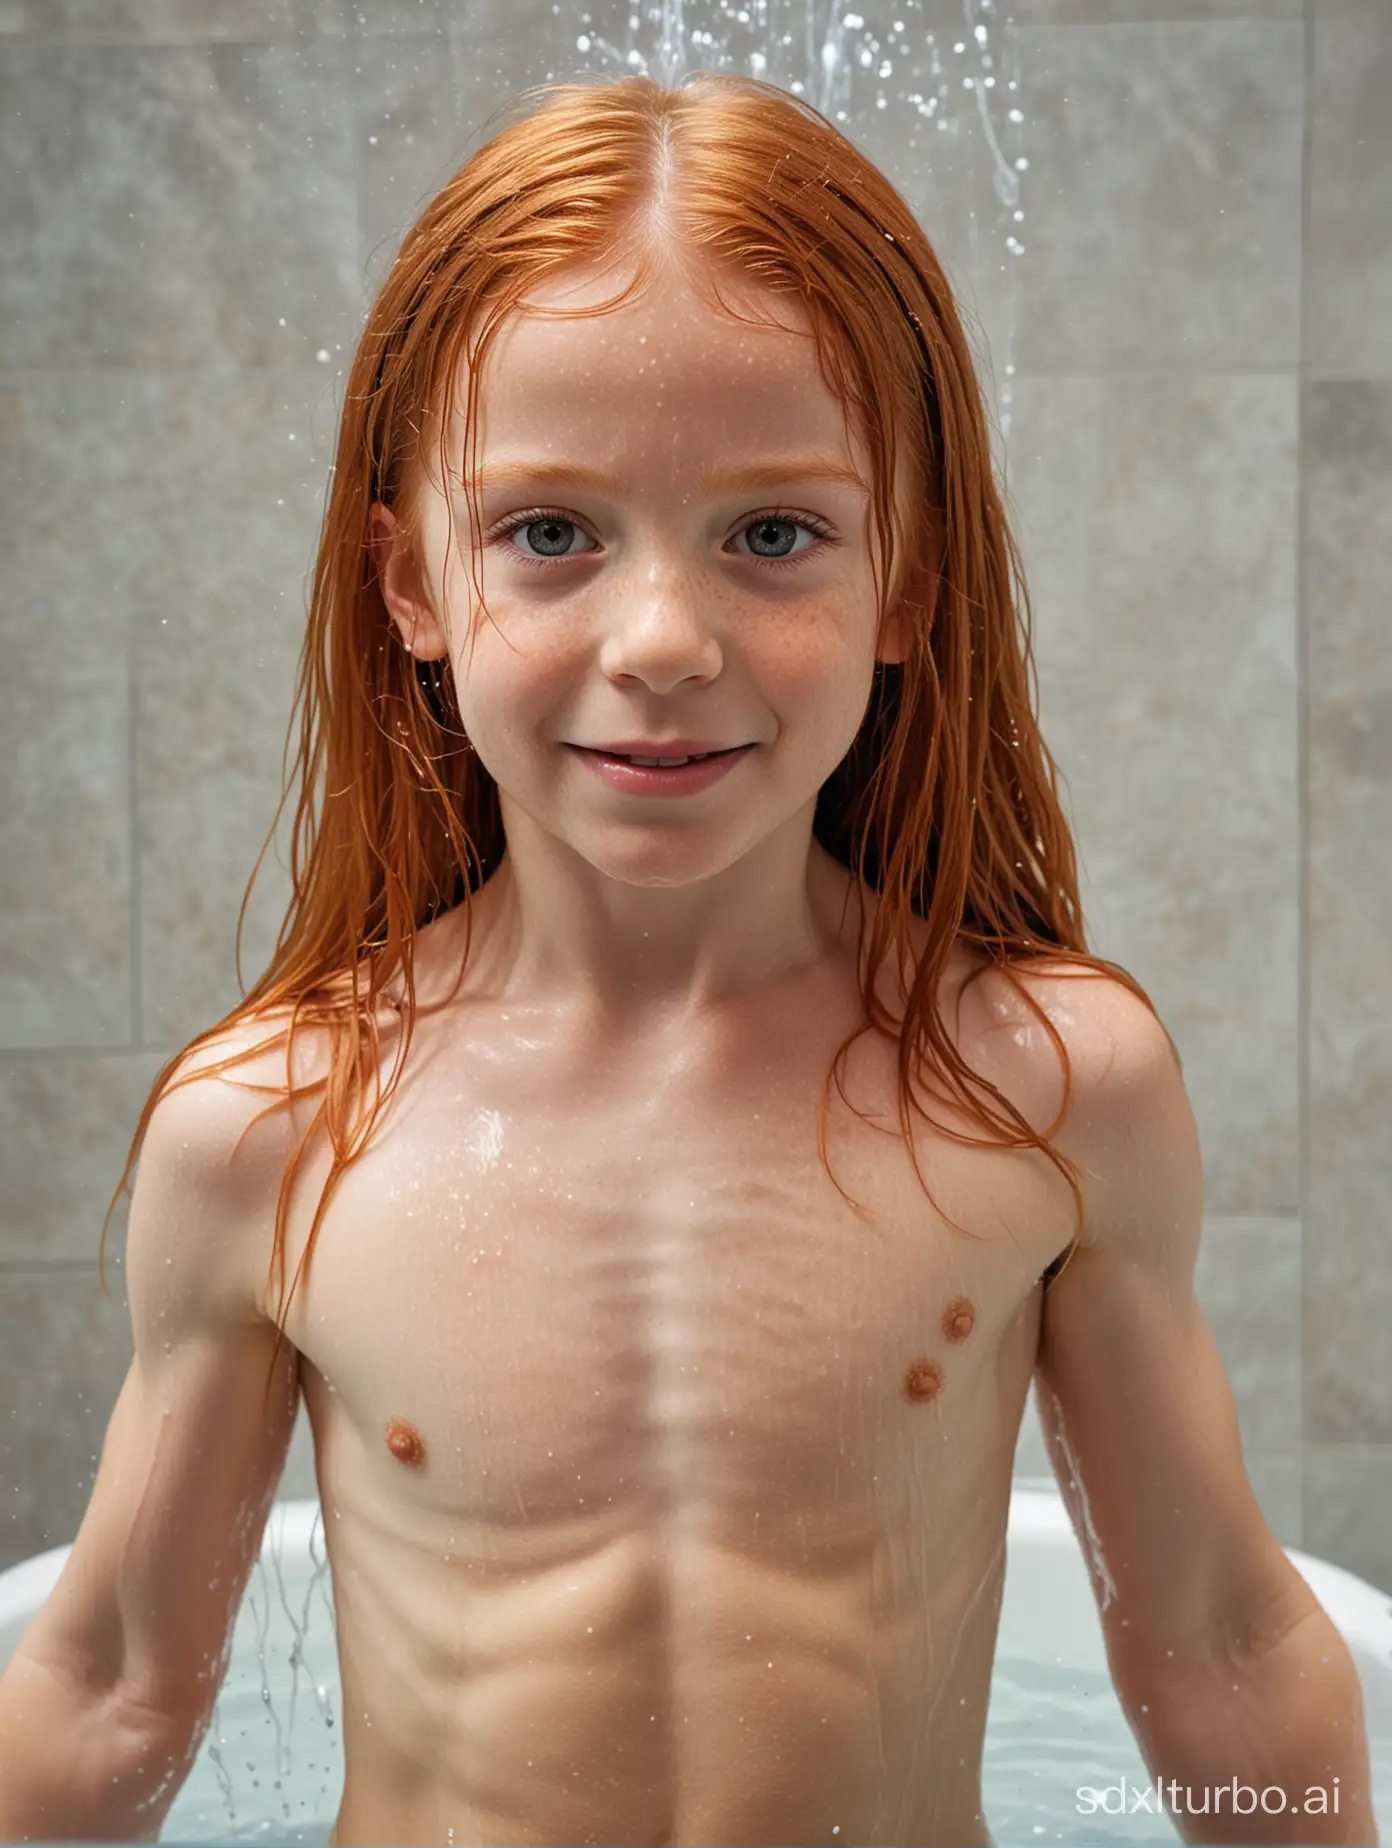 7YearOld-Girl-with-Long-Ginger-Hair-Bathing-and-Revealing-Muscular-Abs